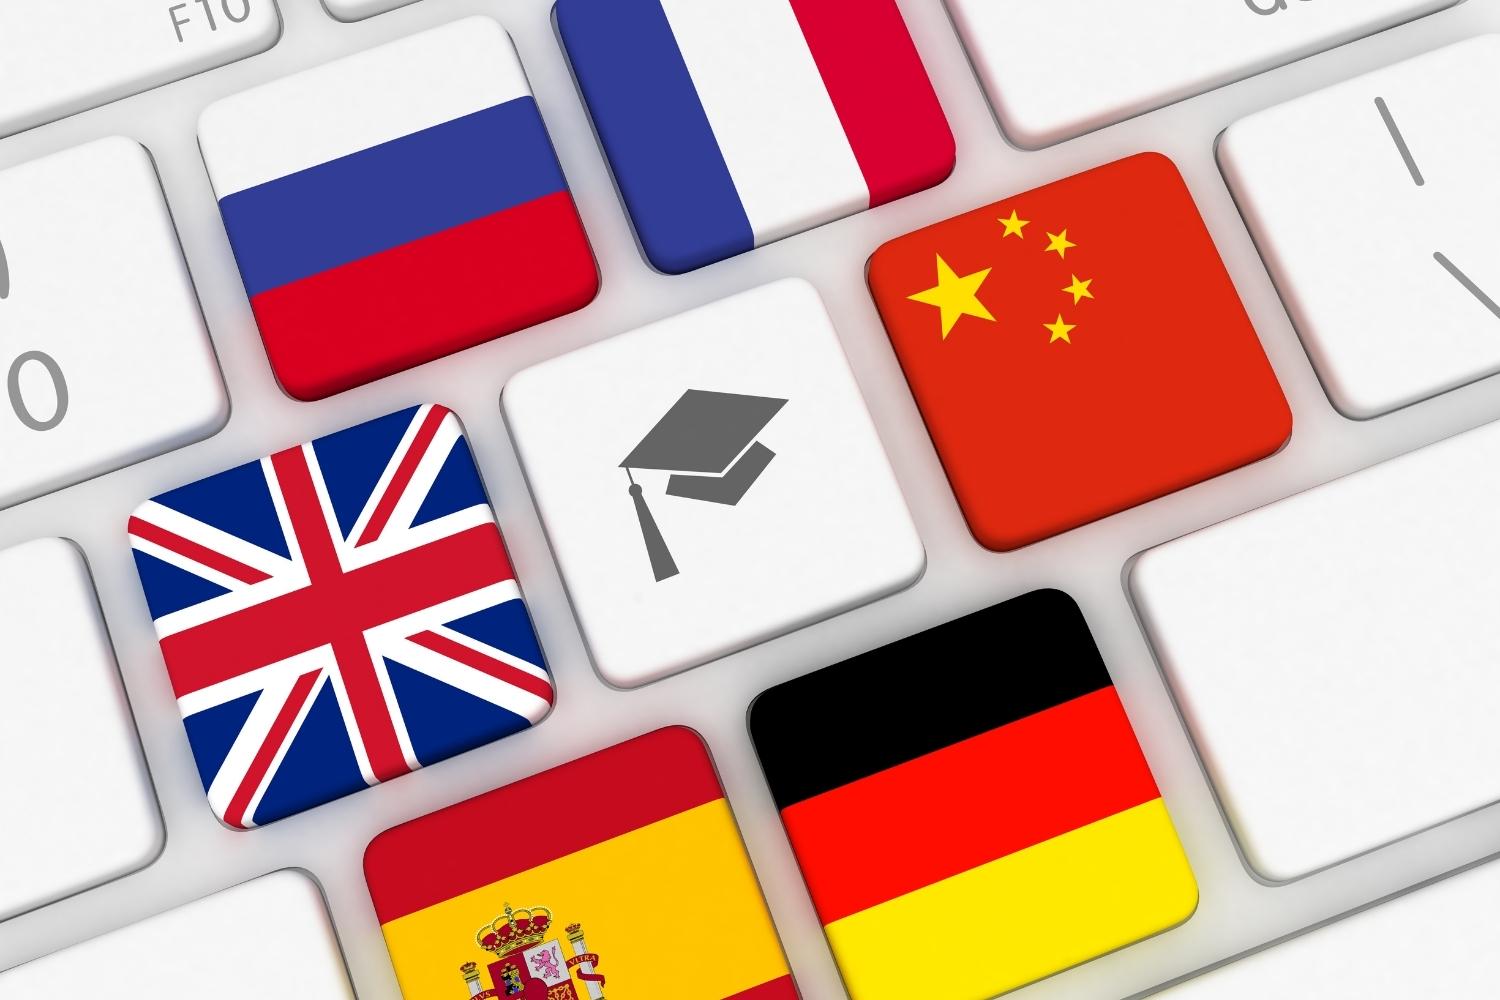 on the keys of a keyboard, flags of different countries lined up around a graduation cap